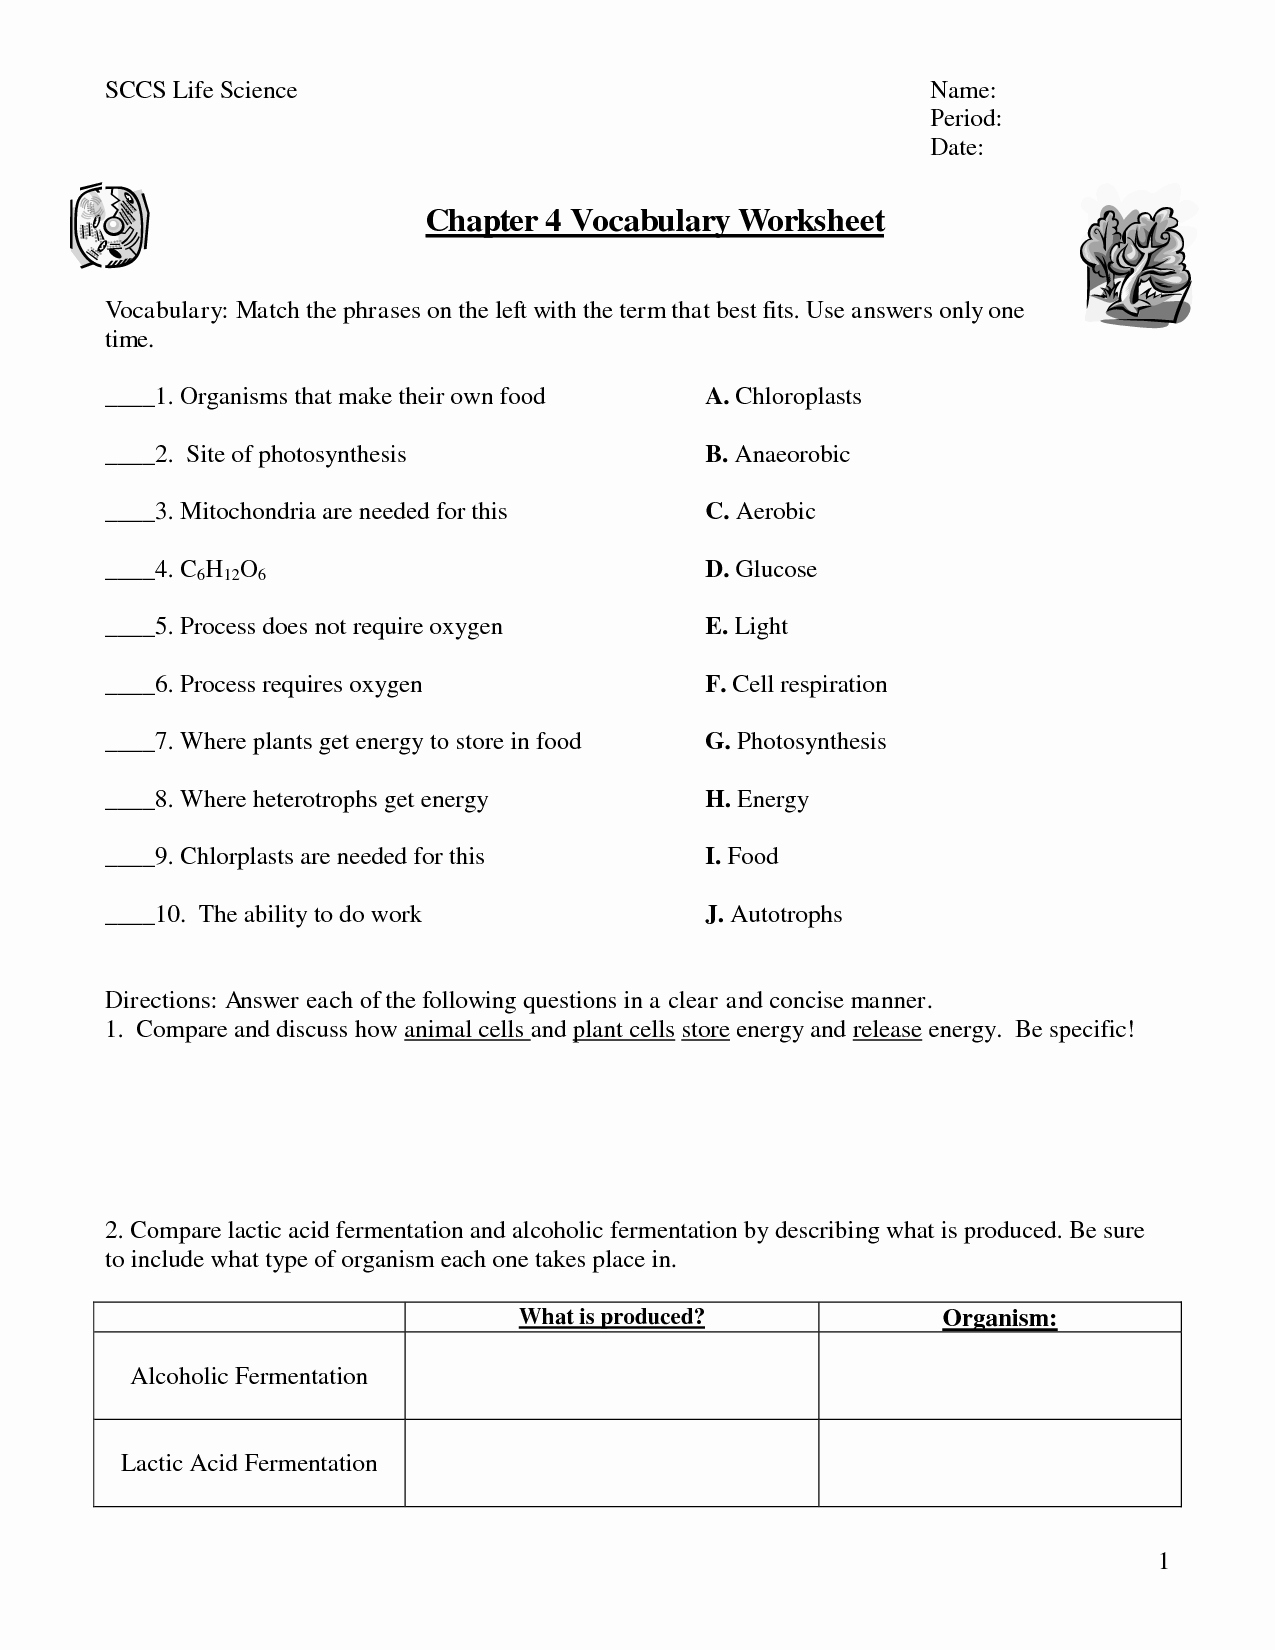 Photosynthesis and Cellular Respiration Worksheet Lovely 15 Best Of Chapter 9 Cellular Respiration Worksheet